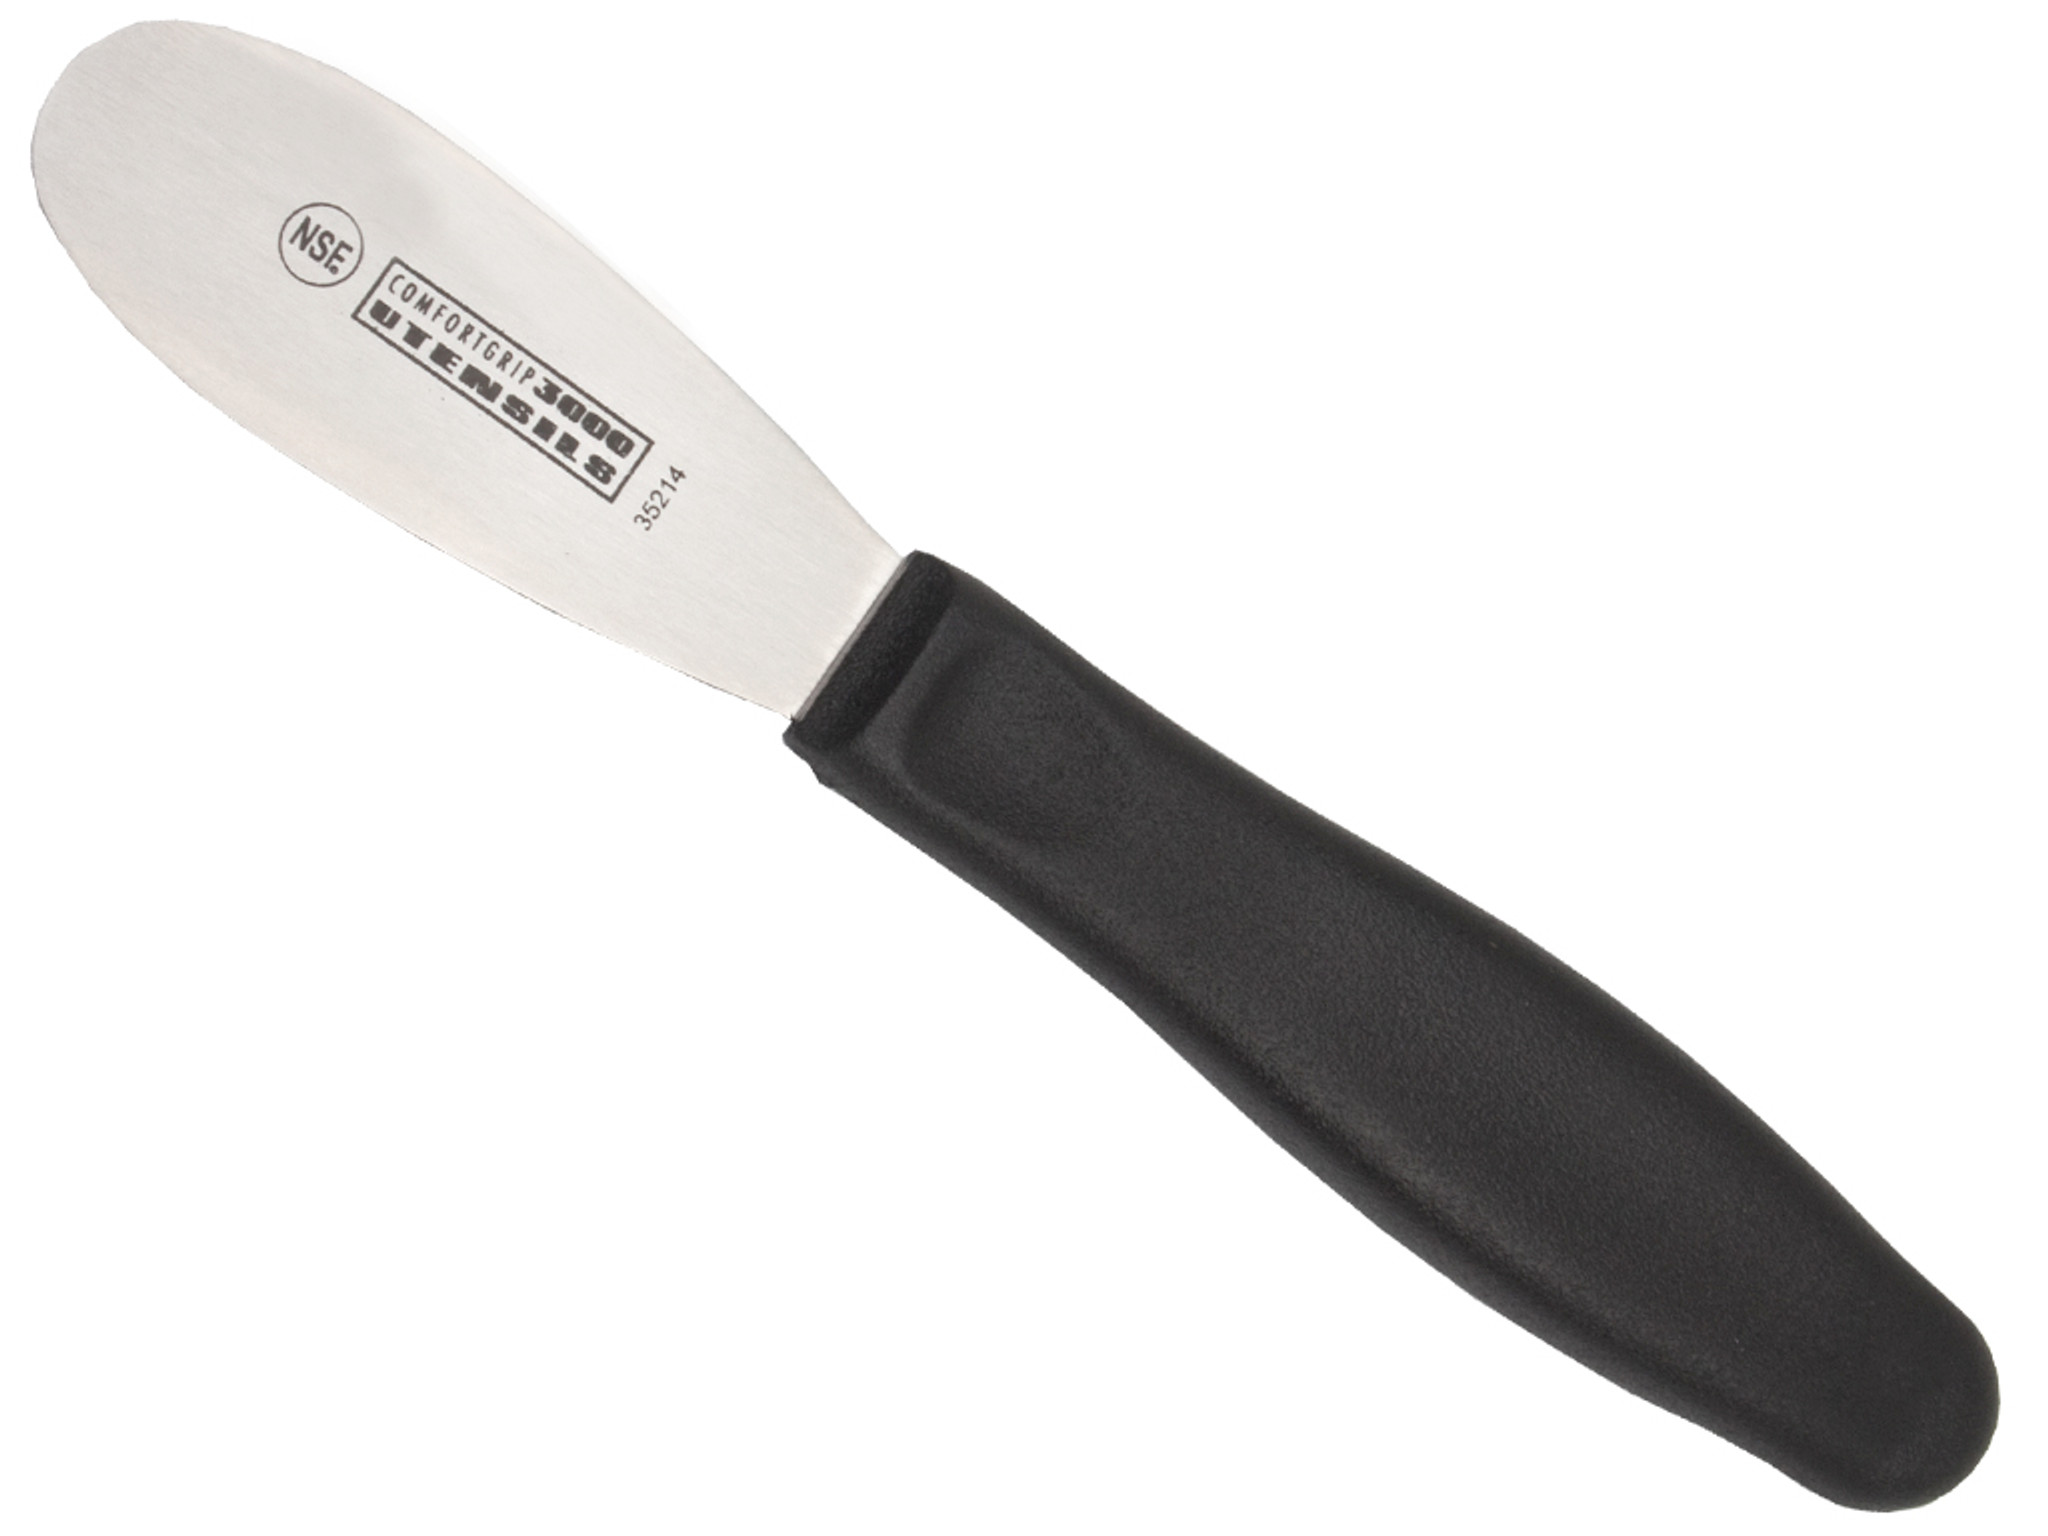 Sandwich Hand Made Knife, with White Plastic Handle Butter Spreader (2